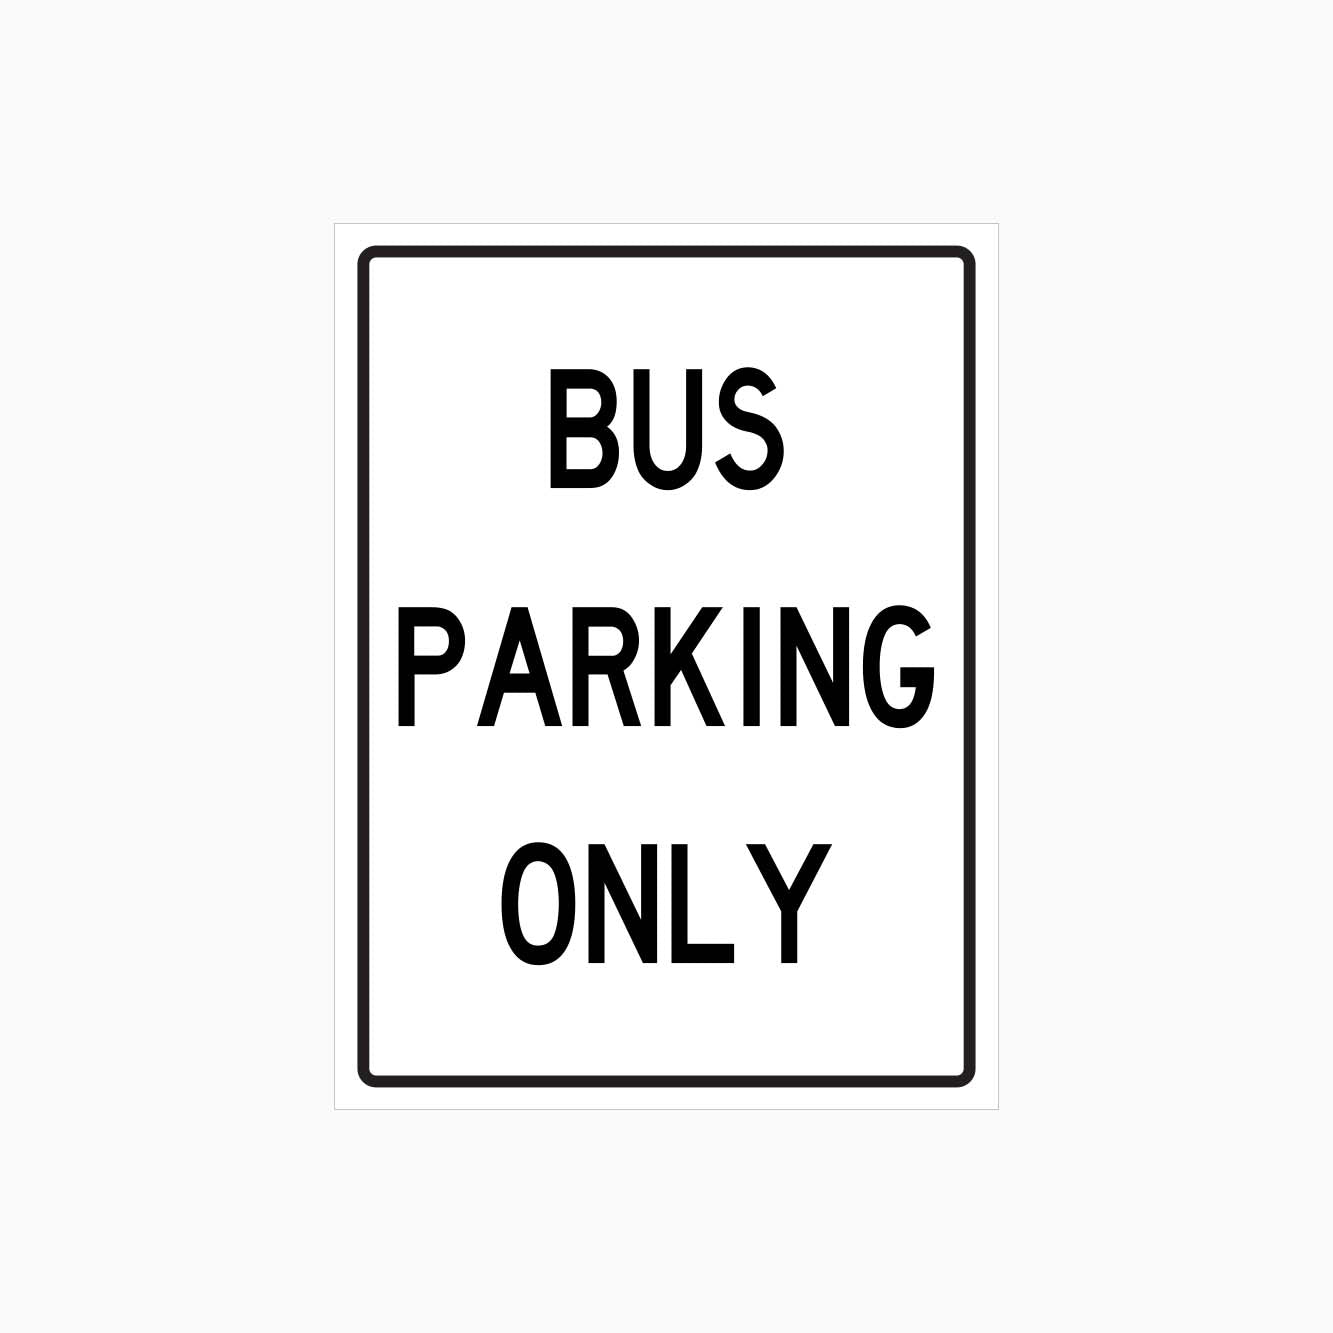 BUS PARKING ONLY SIGN - GET SIGNS